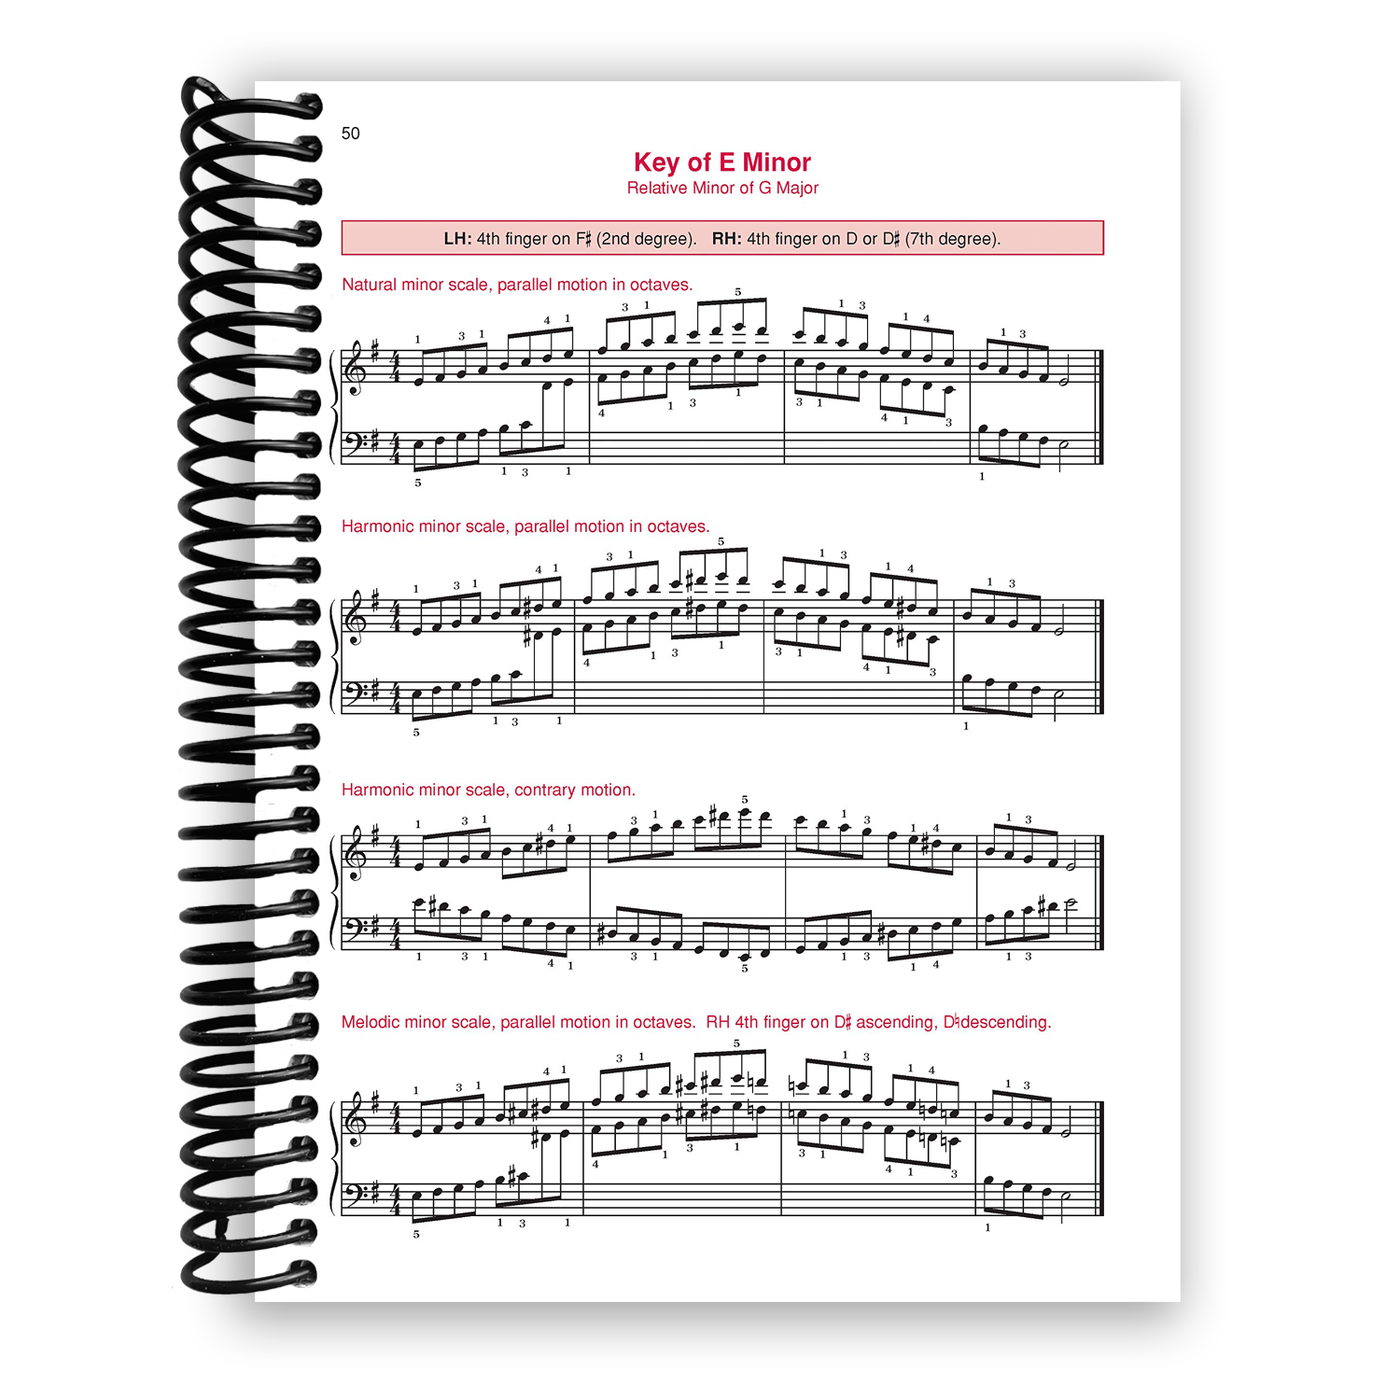 Inside Content of The Complete Book of Scales, Chords, Arpeggios & Cadences (Key of E Minor)